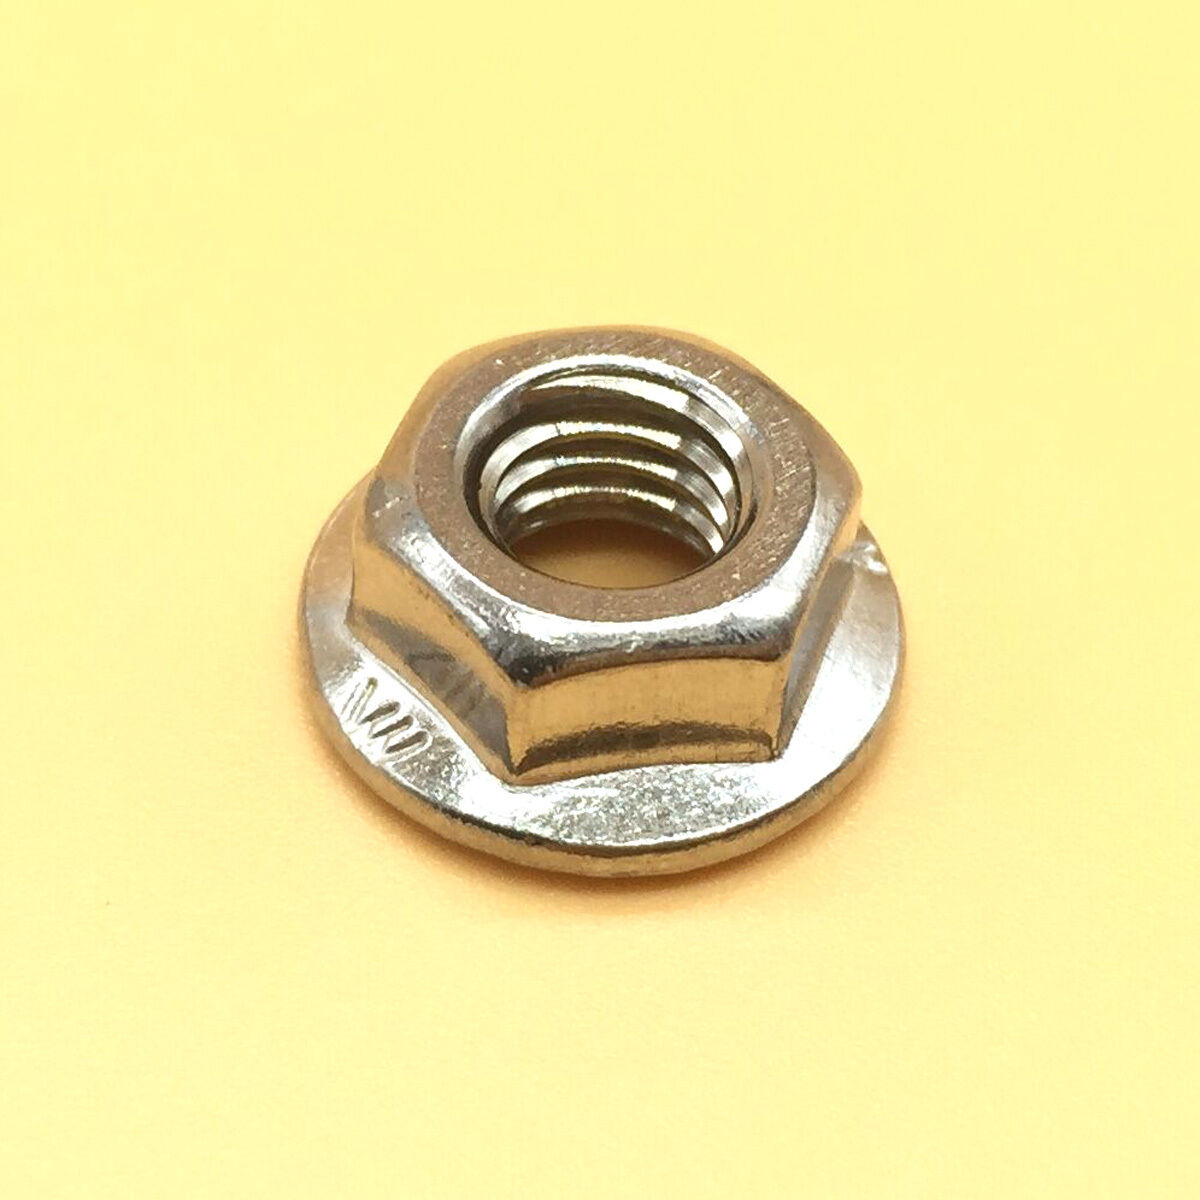 12 Pcs M10 x 1.5 Stainless Steel Flange Hex Nut Right Hand Thread [M_M_S]